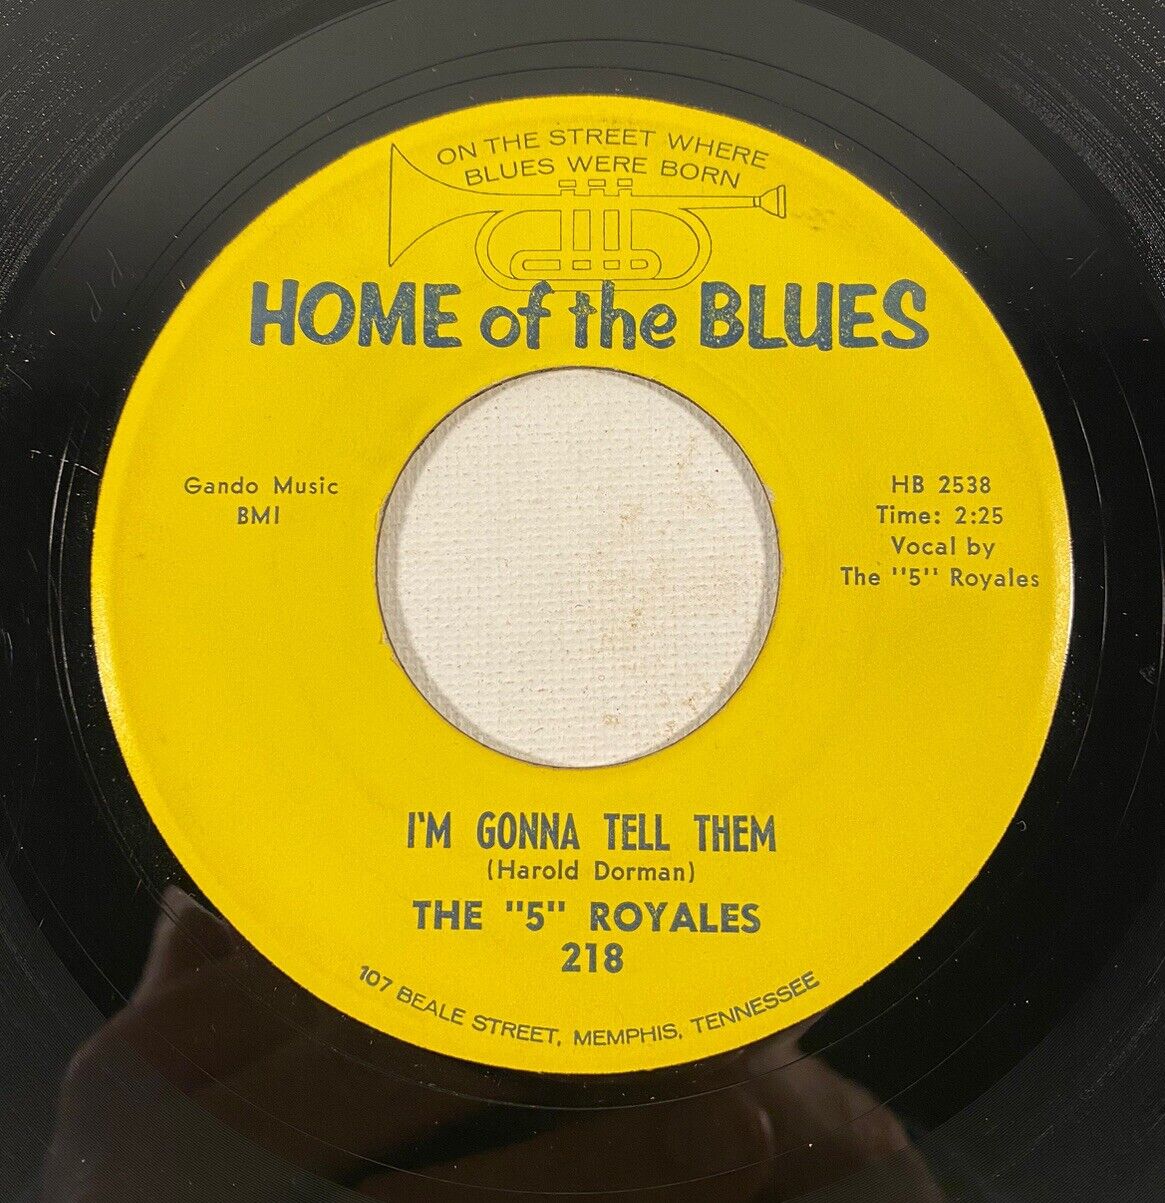 Home of the Blues 218 The 5 Royal - I'm Gonna Tell Them 7", R&B 1961 VG+